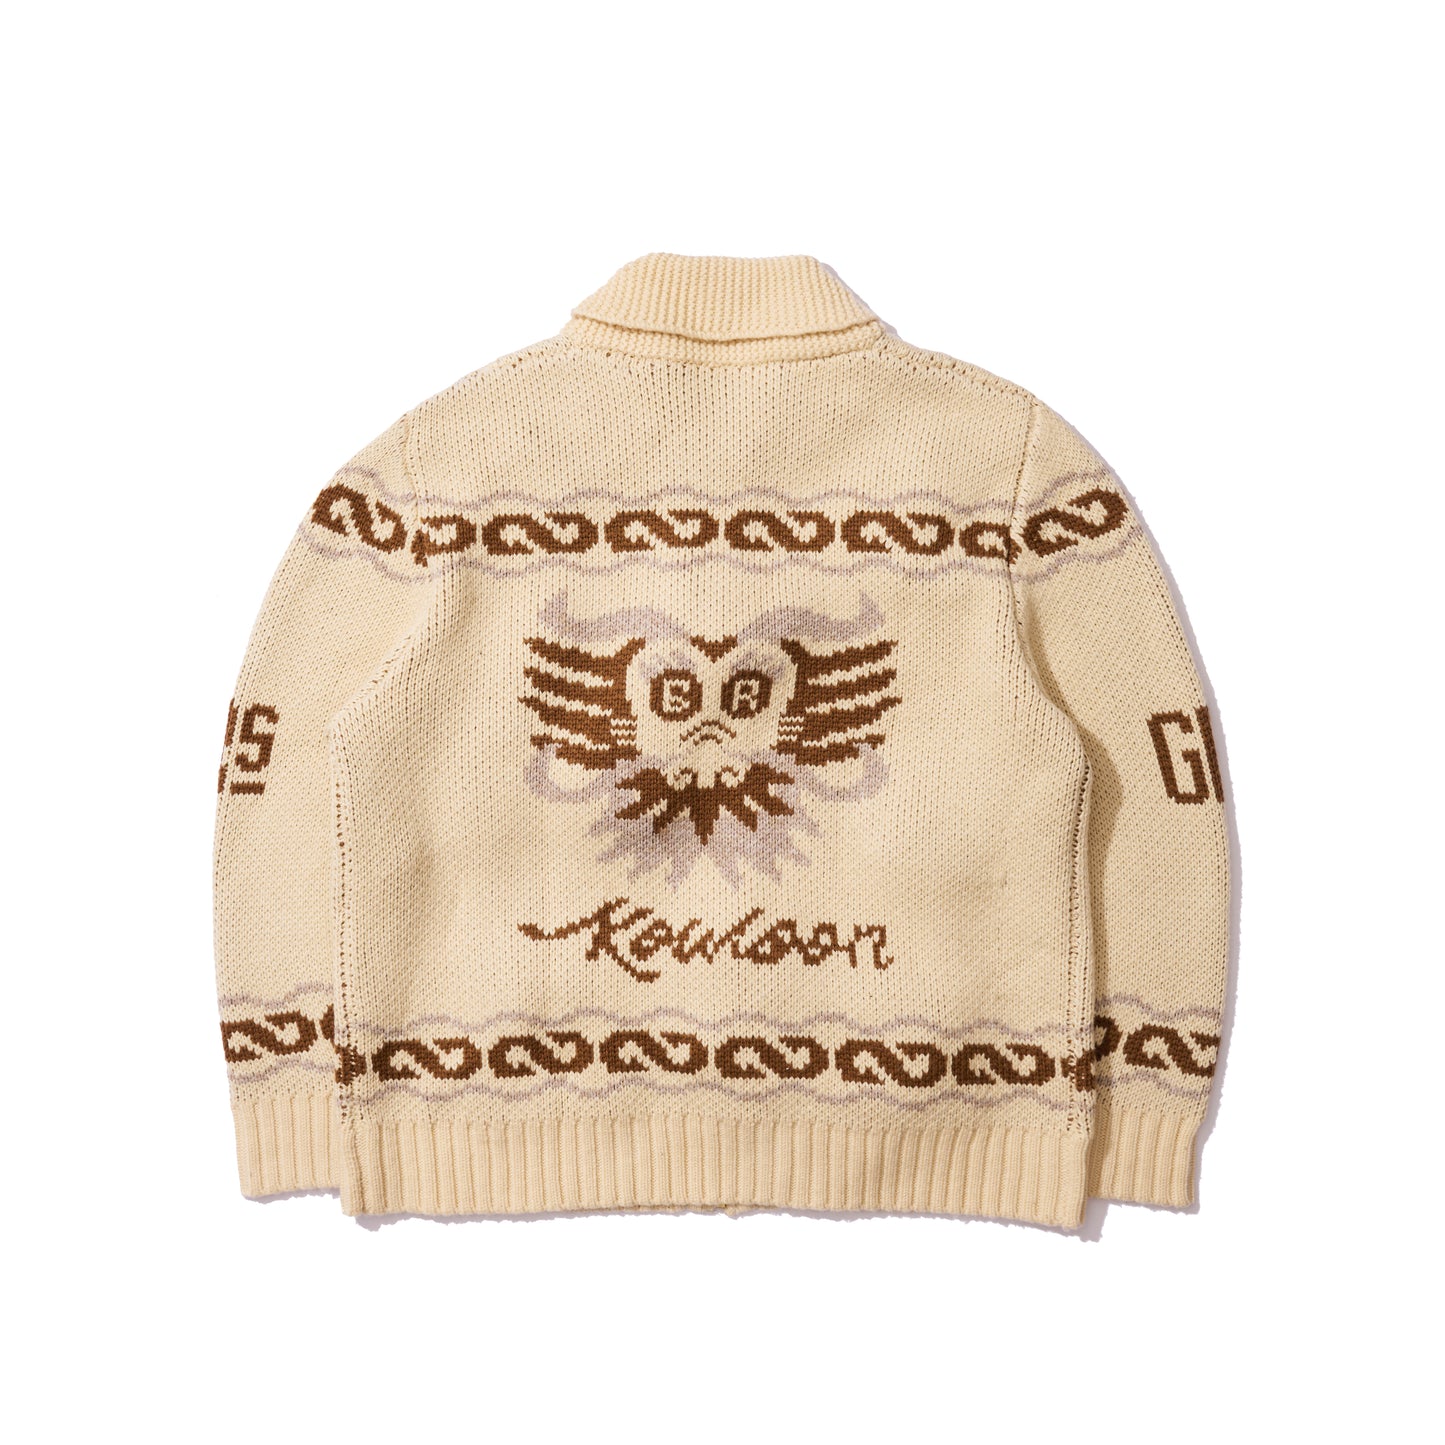 Tokyo & Kowloon Dragon Patterned Knitted Cardigan